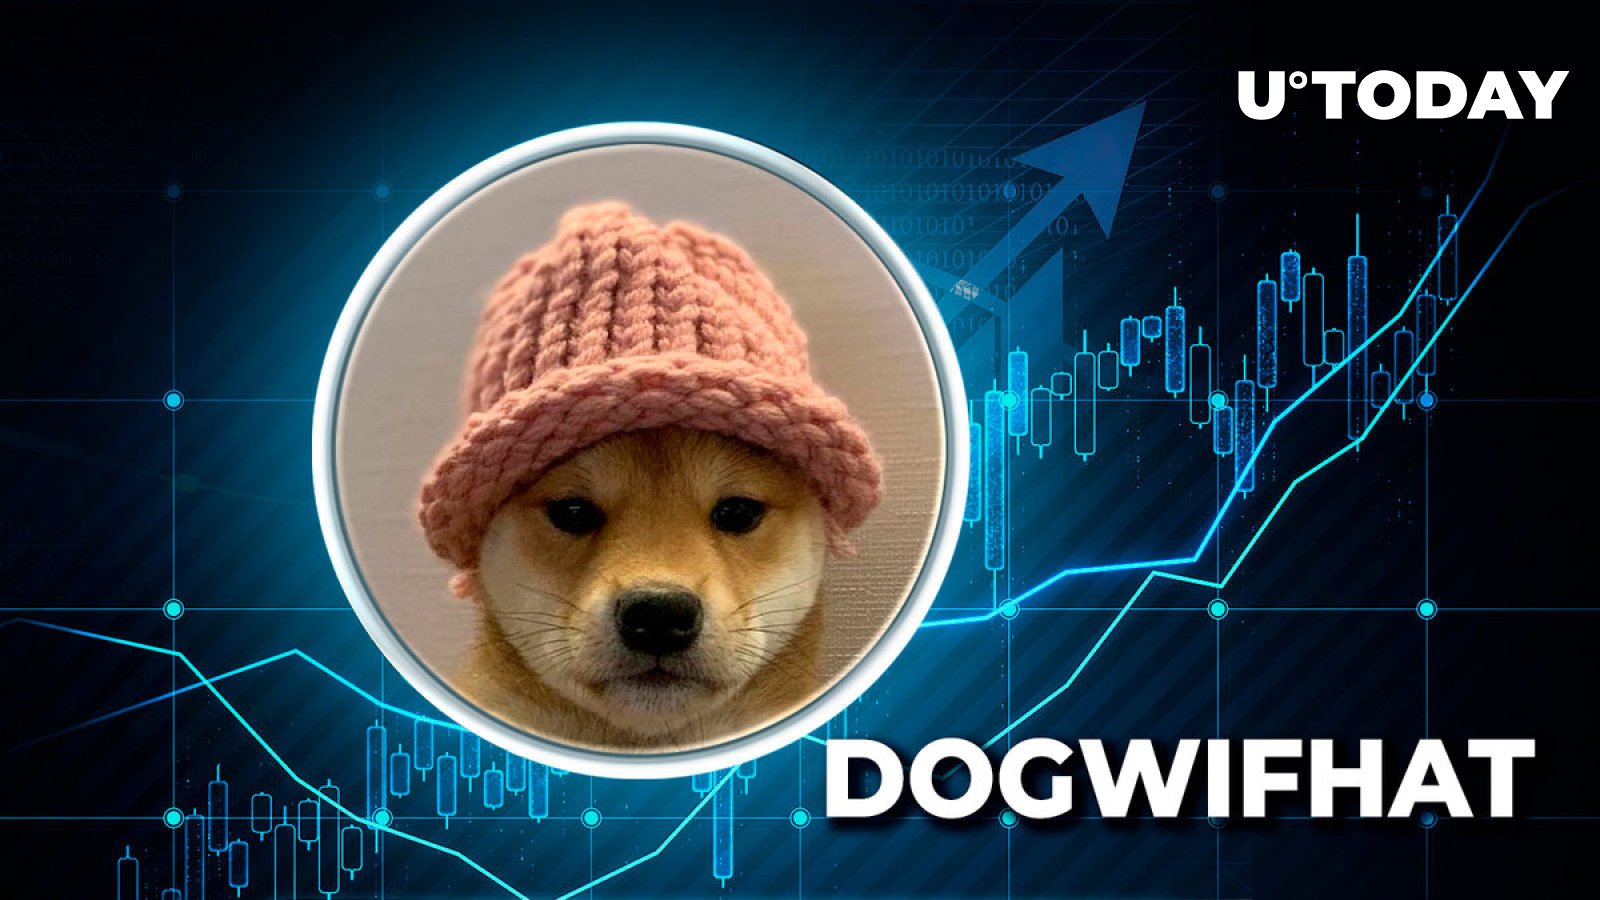 Top Solana Meme Coin Dogwifhat (WIF) Skyrockets 1,481% in Major Trading Anomaly